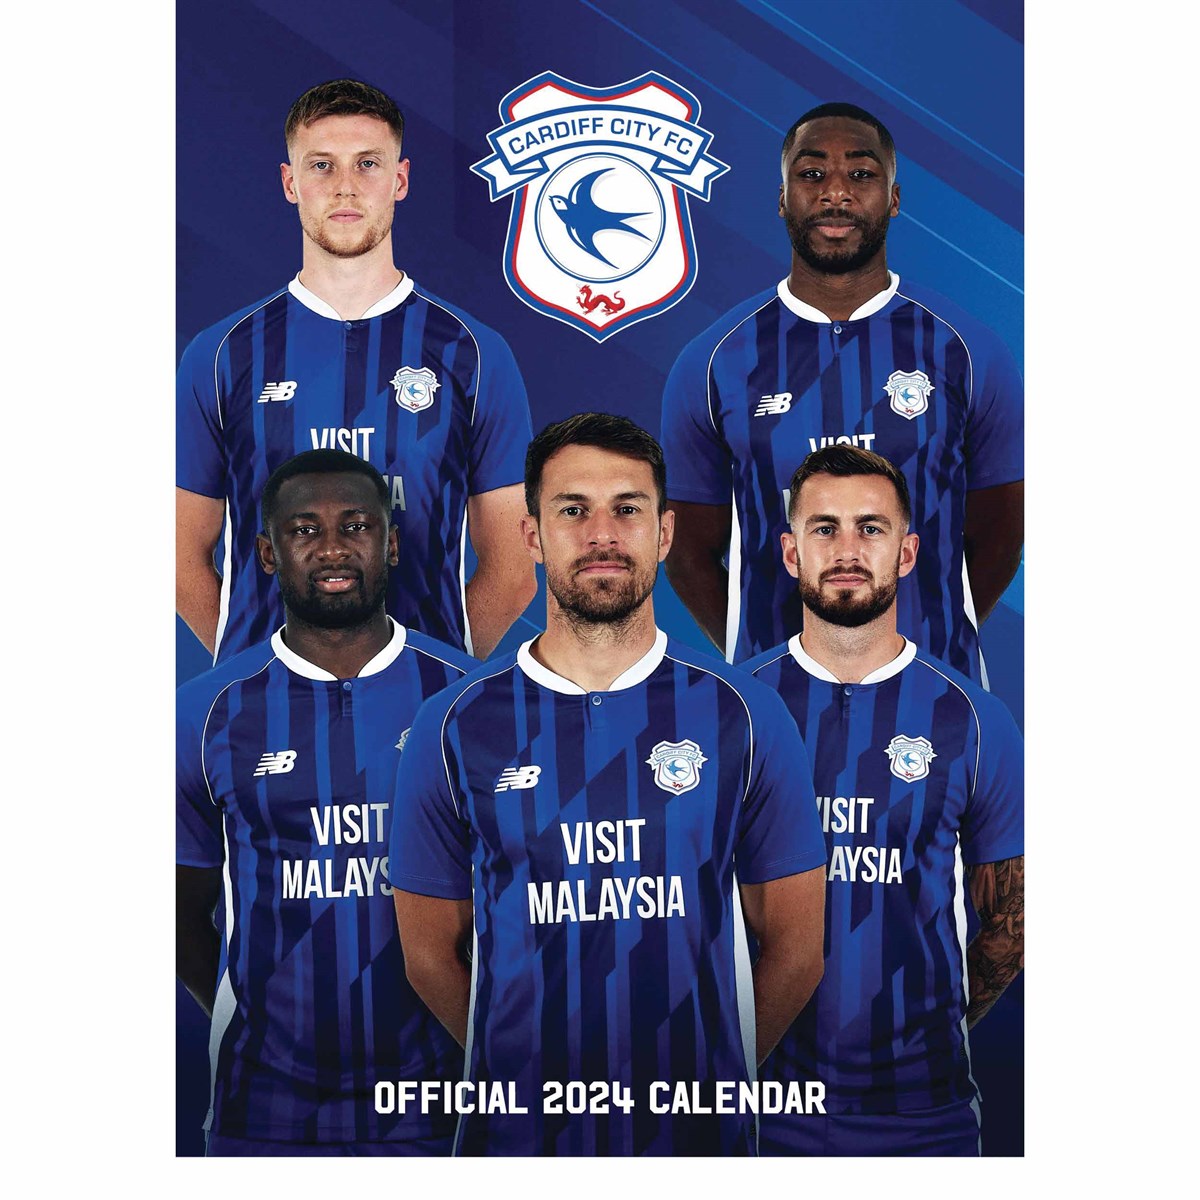 Personalised Cardiff City FC Gifts & Merchandise